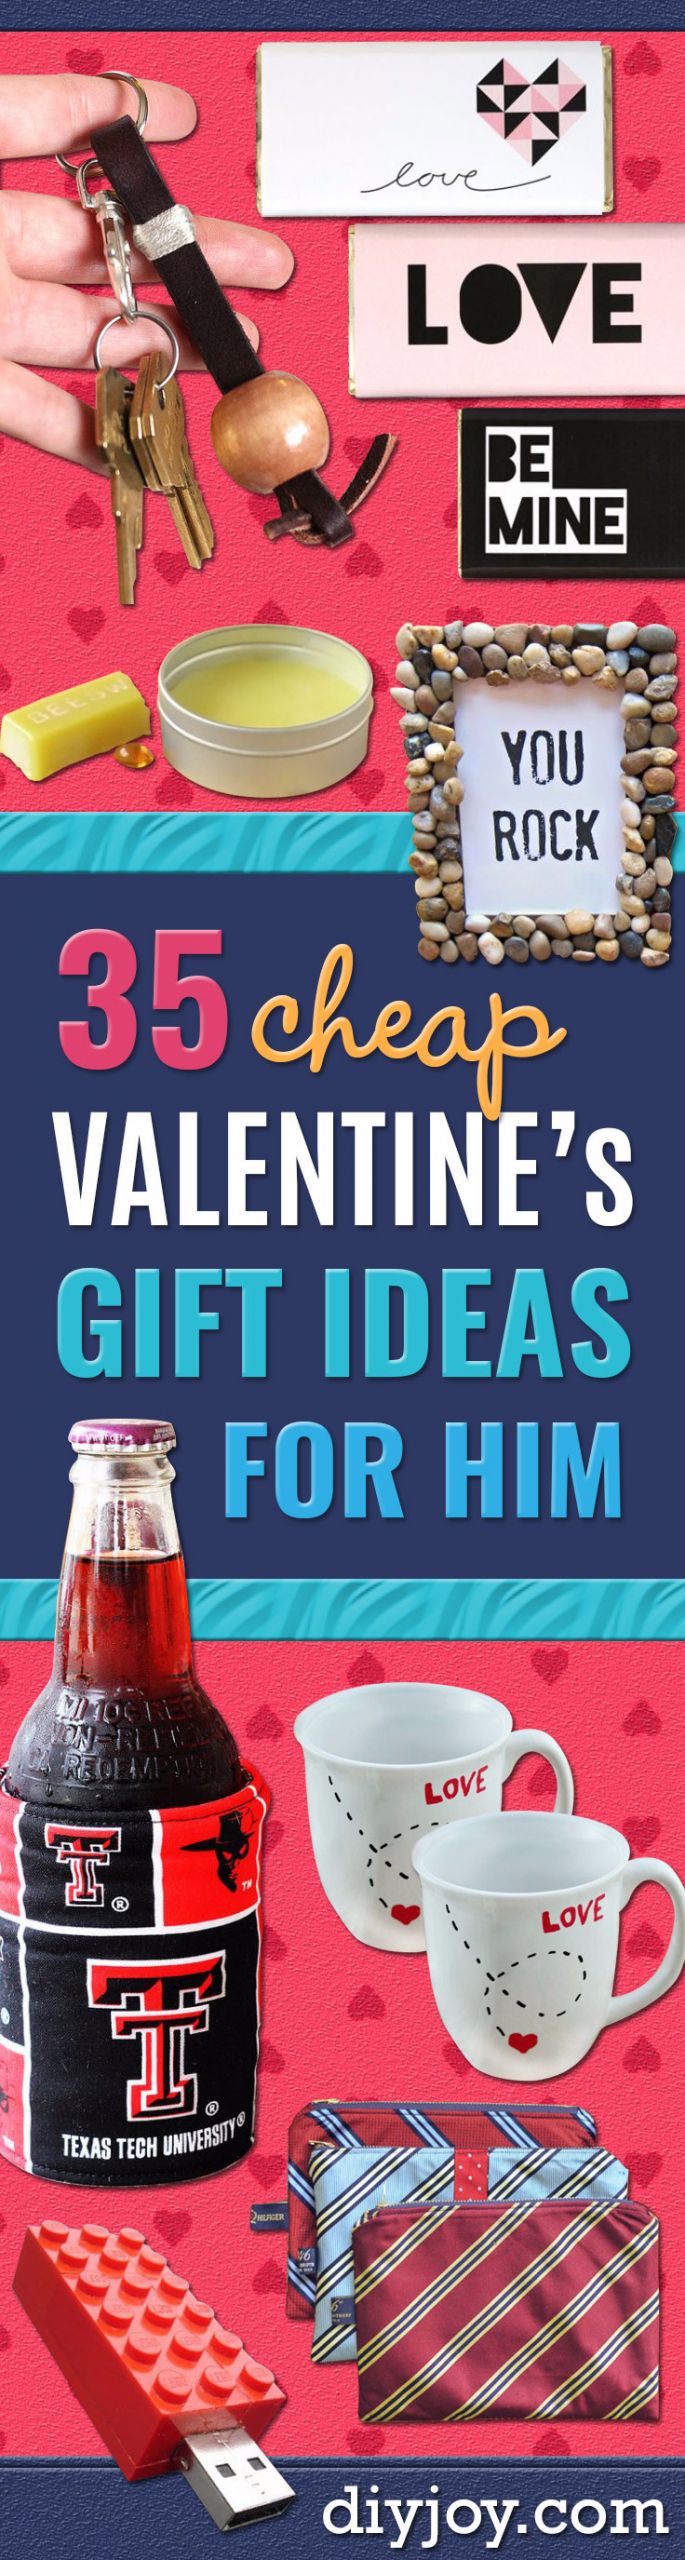 Gift Ideas For Him Valentines
 35 Cheap Valentine s Gift Ideas for Him